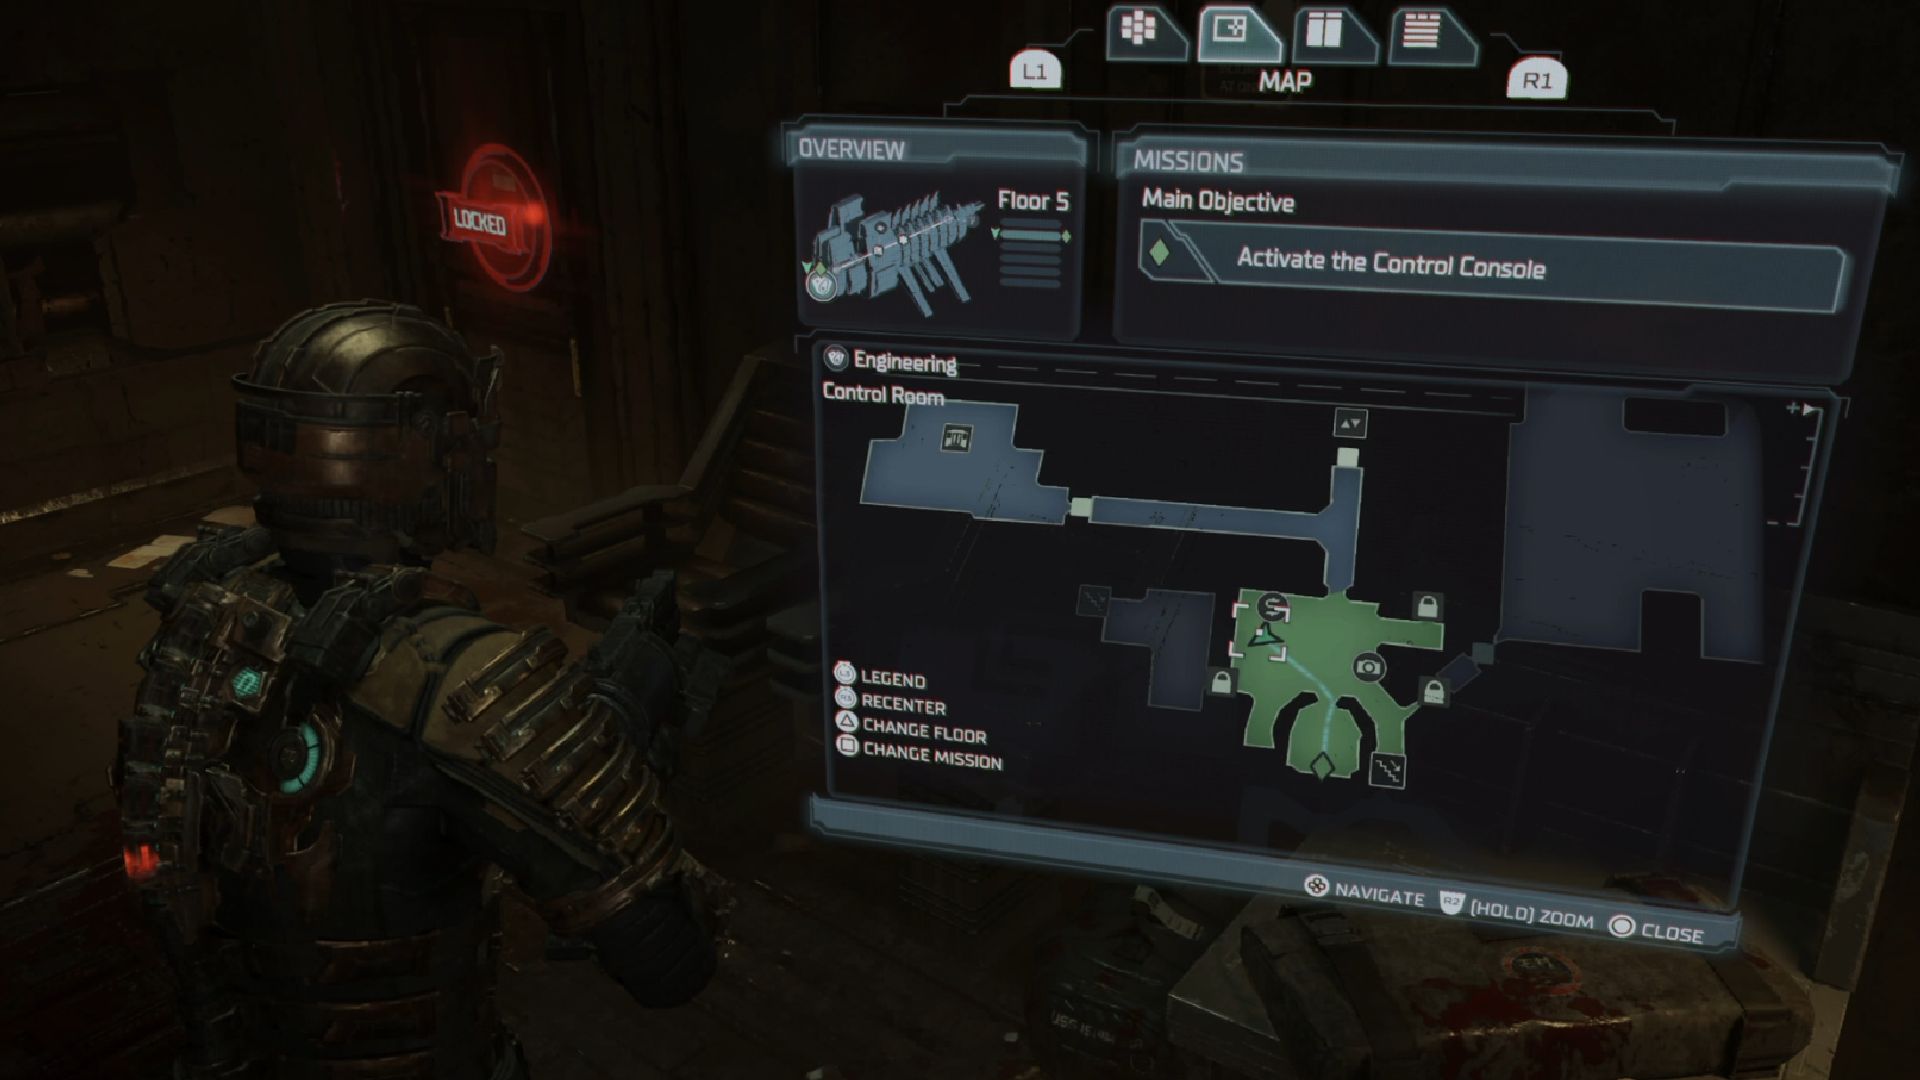 Dead Space Weapon Upgrades: The weapon upgrade can be seen